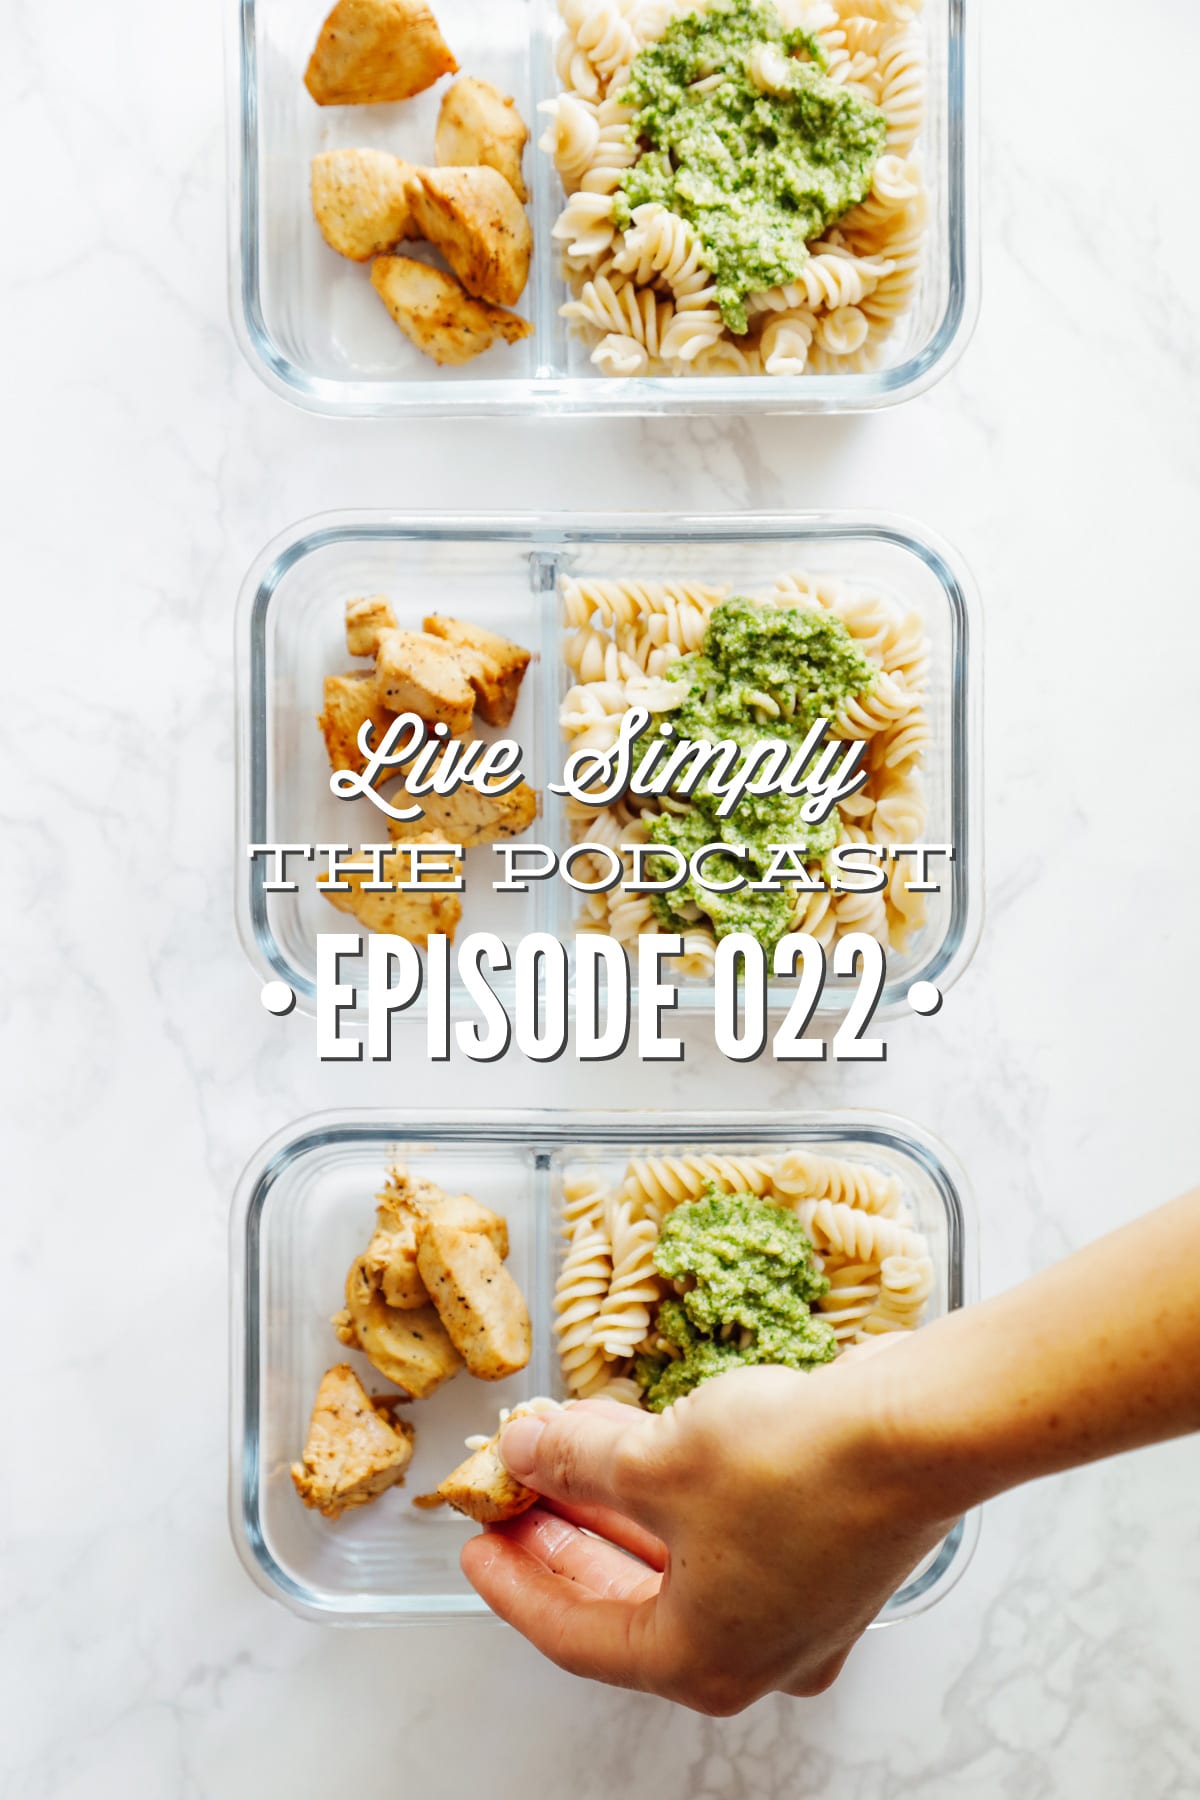 Podcast 022: Let’s Talk About Simplifying Food Prep